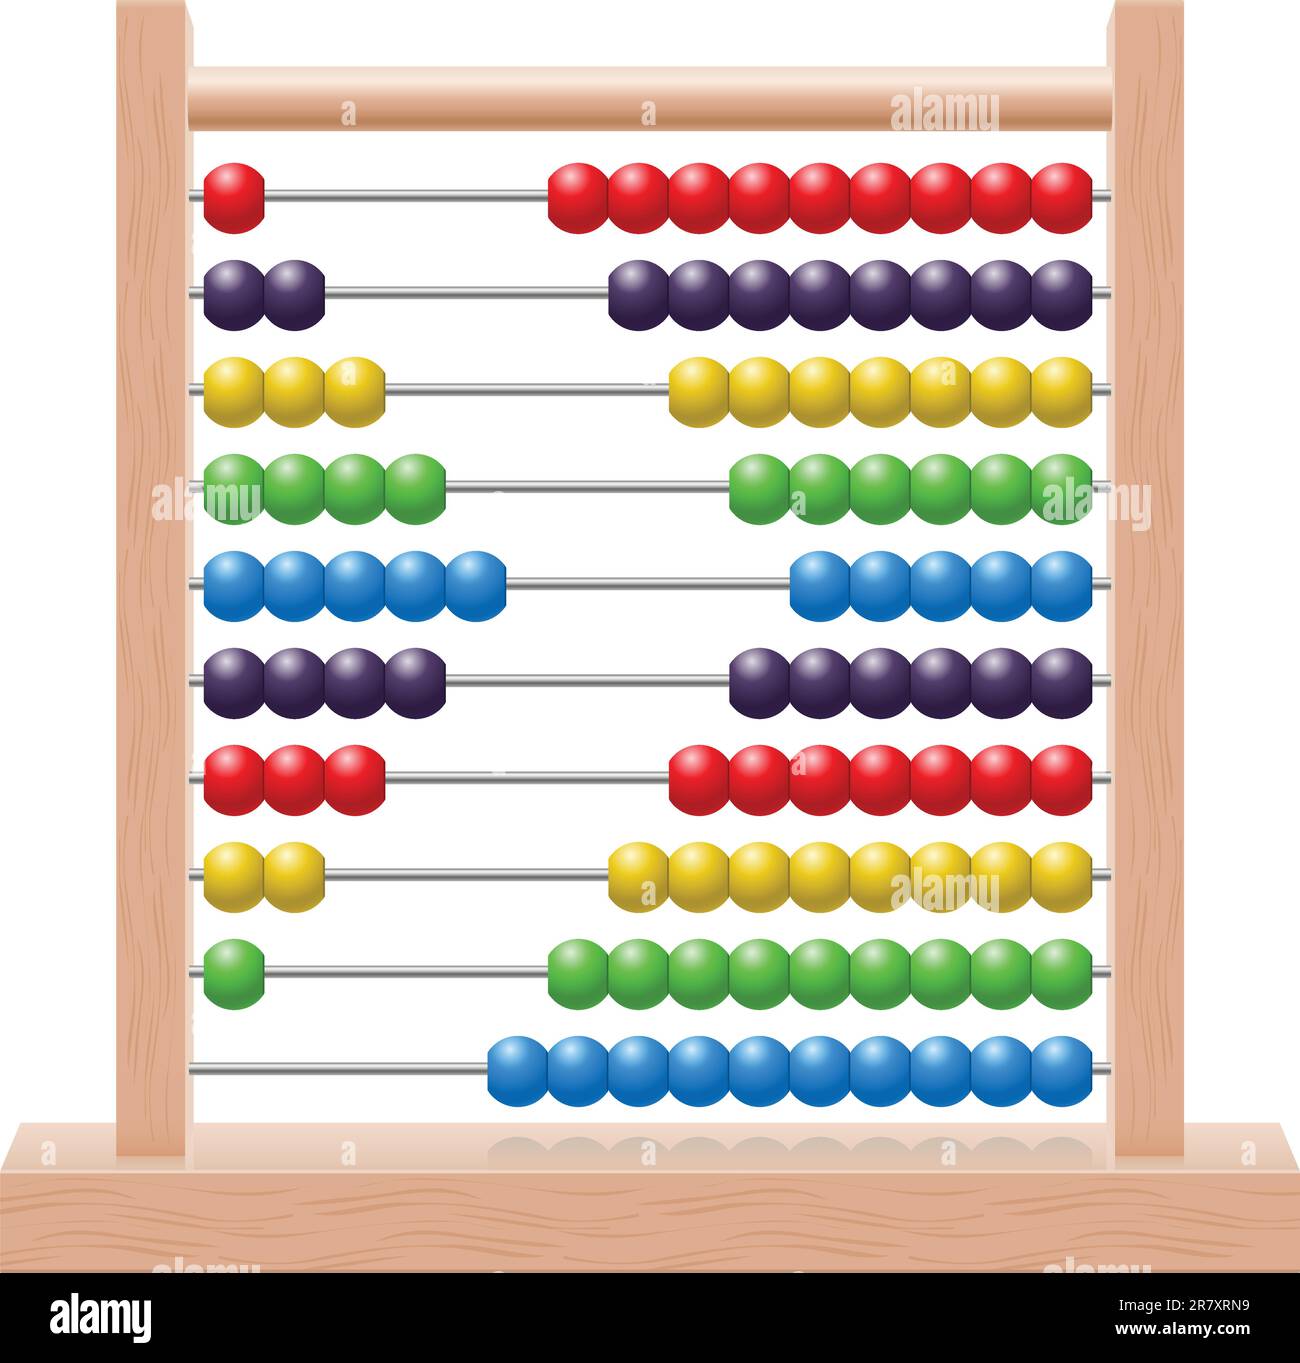 Illustration of an abacus with rainbow colored beads Stock Vector